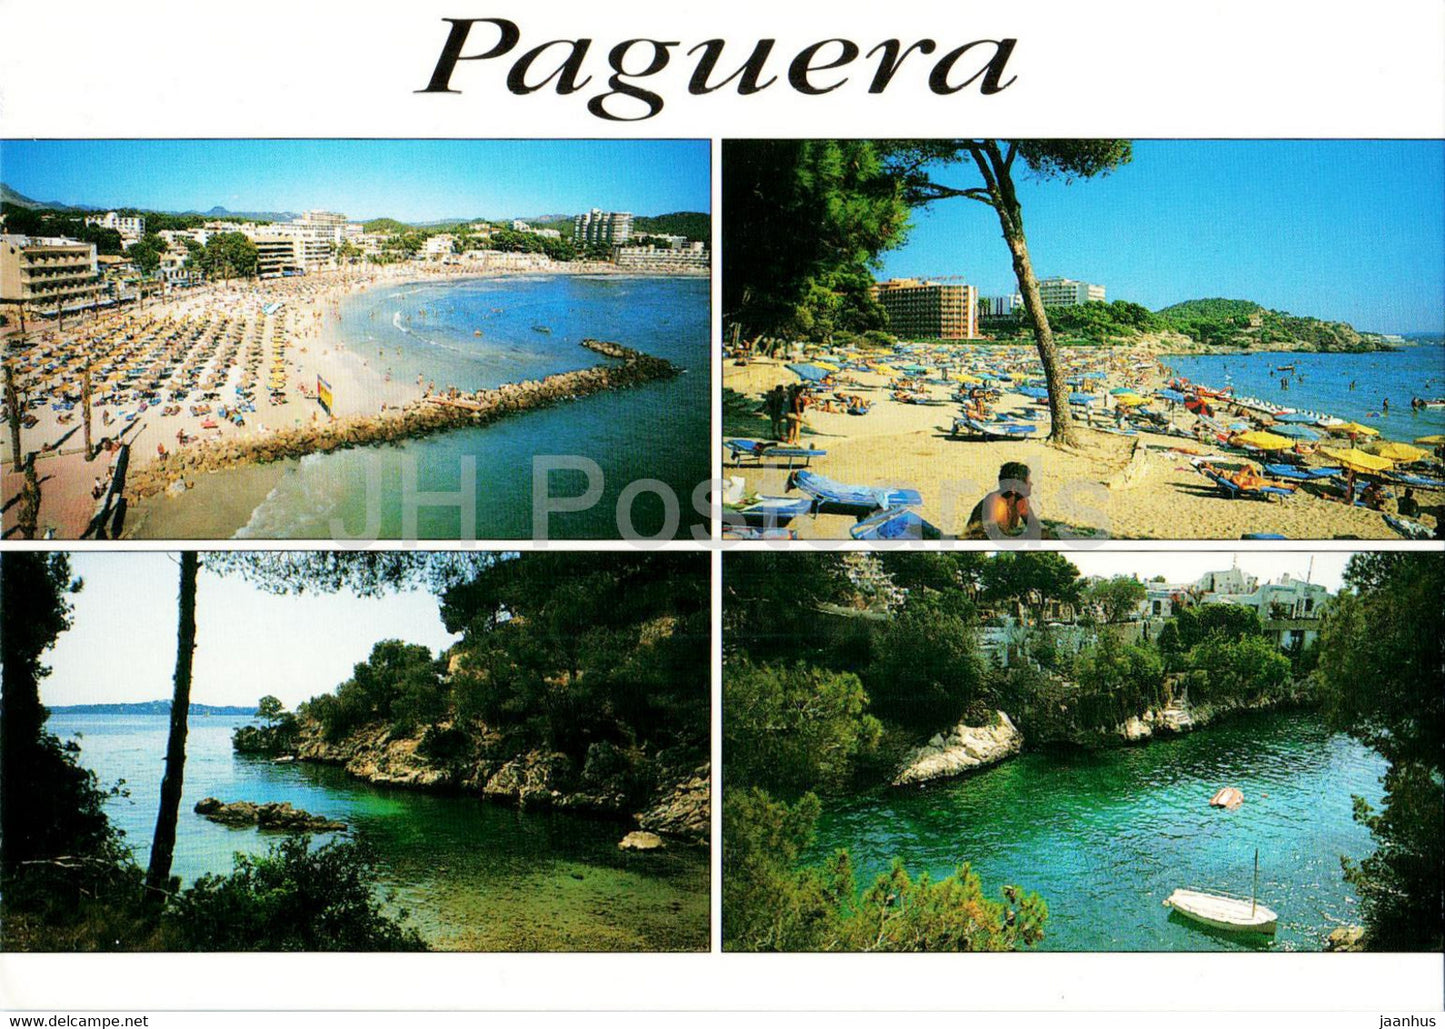 Paguera - Mallorca - multiview - 2942 - 2000 - Spain - used - JH Postcards